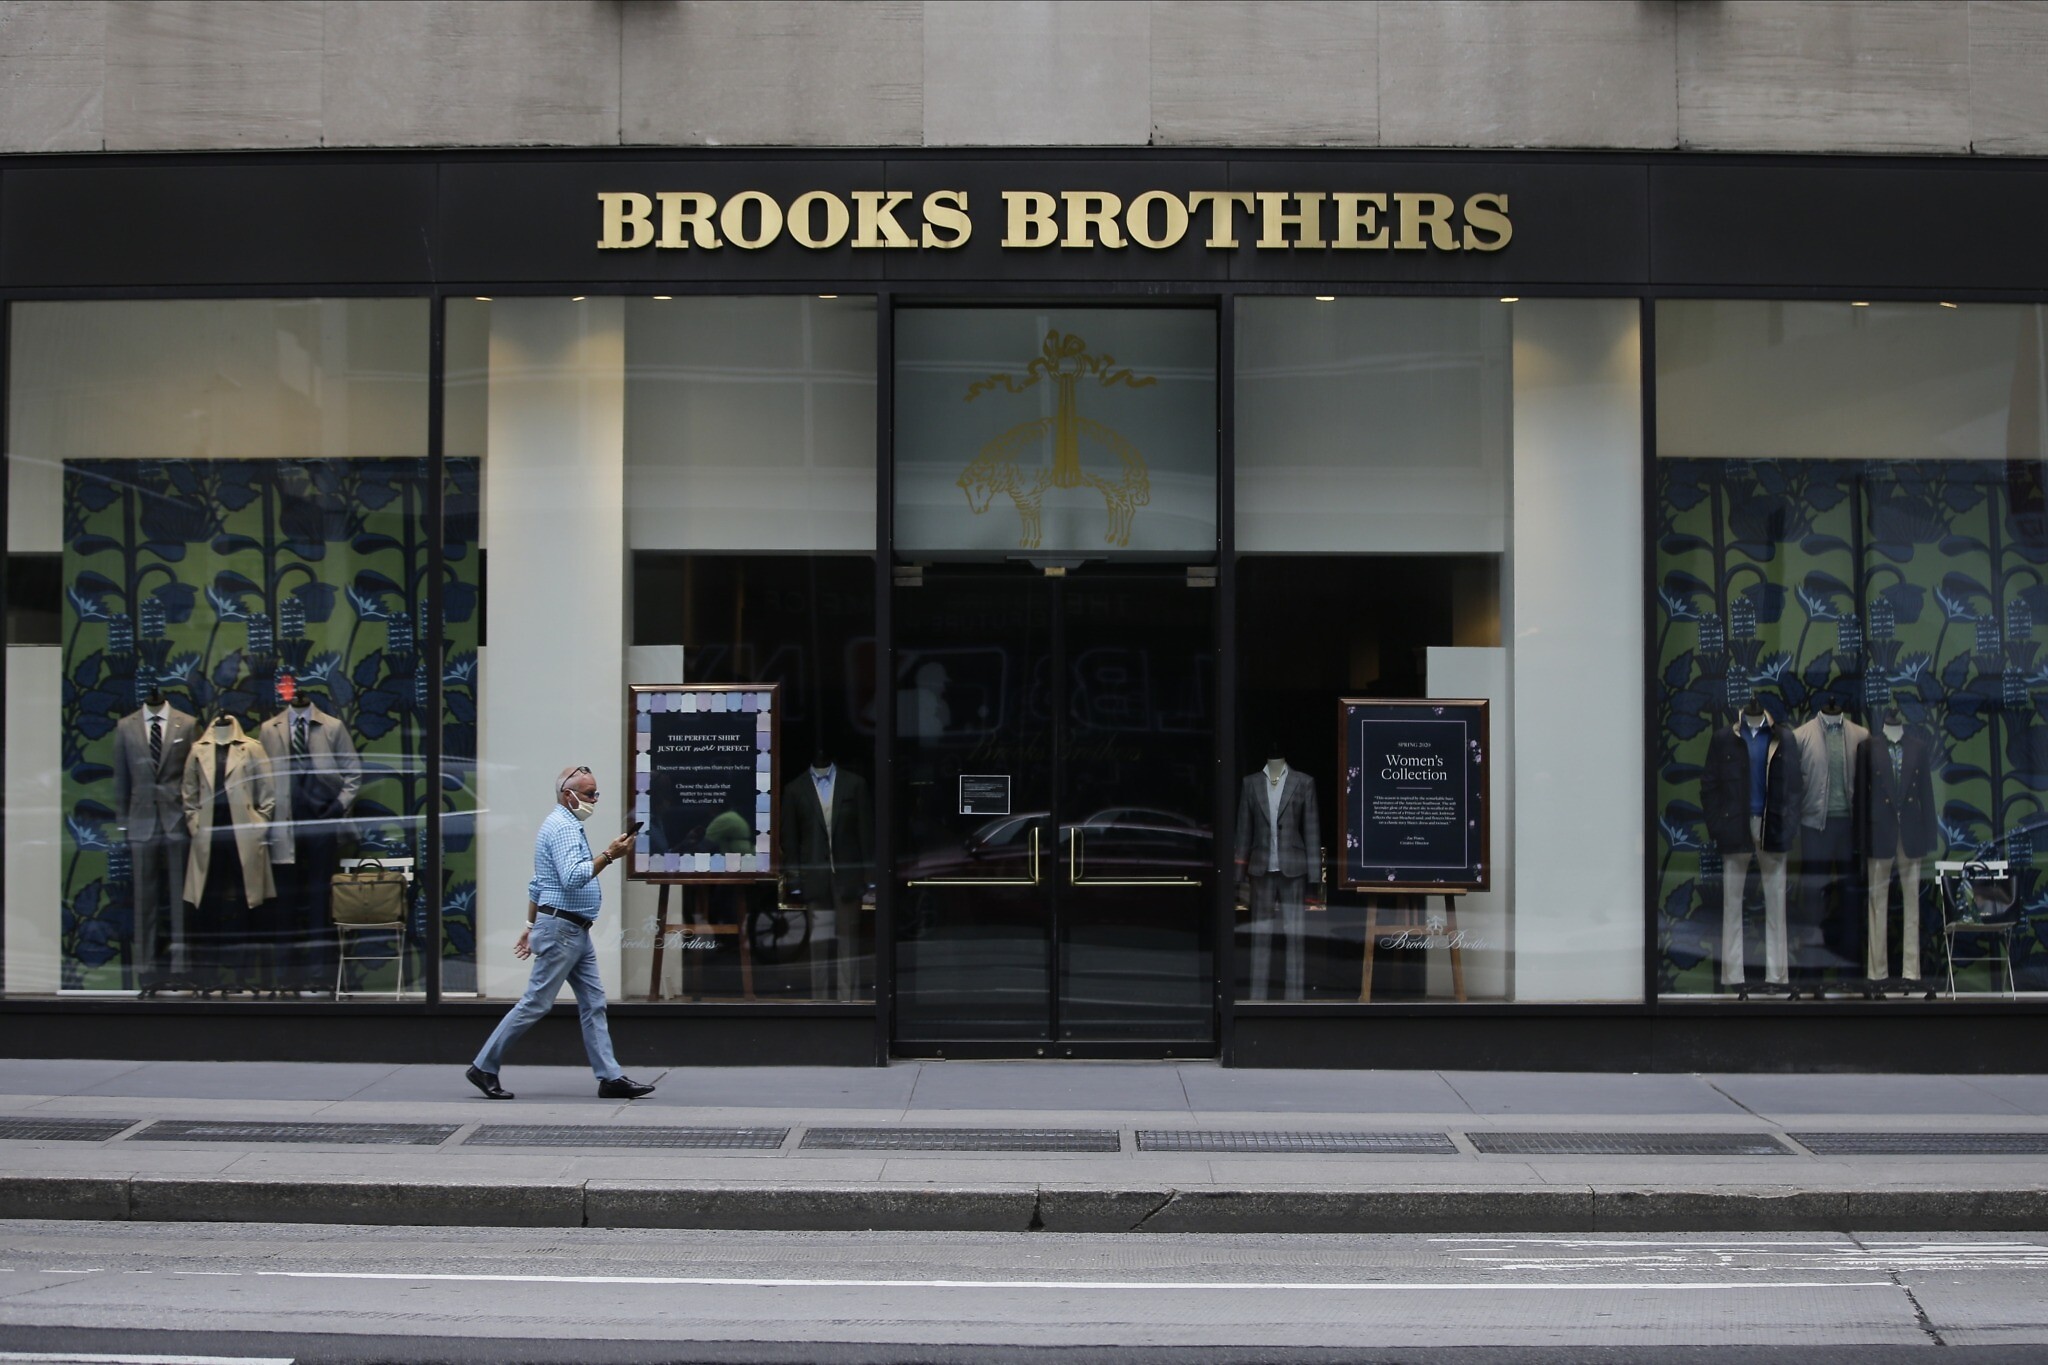 Brooks Brothers, dressers of presidents, coming to Israel